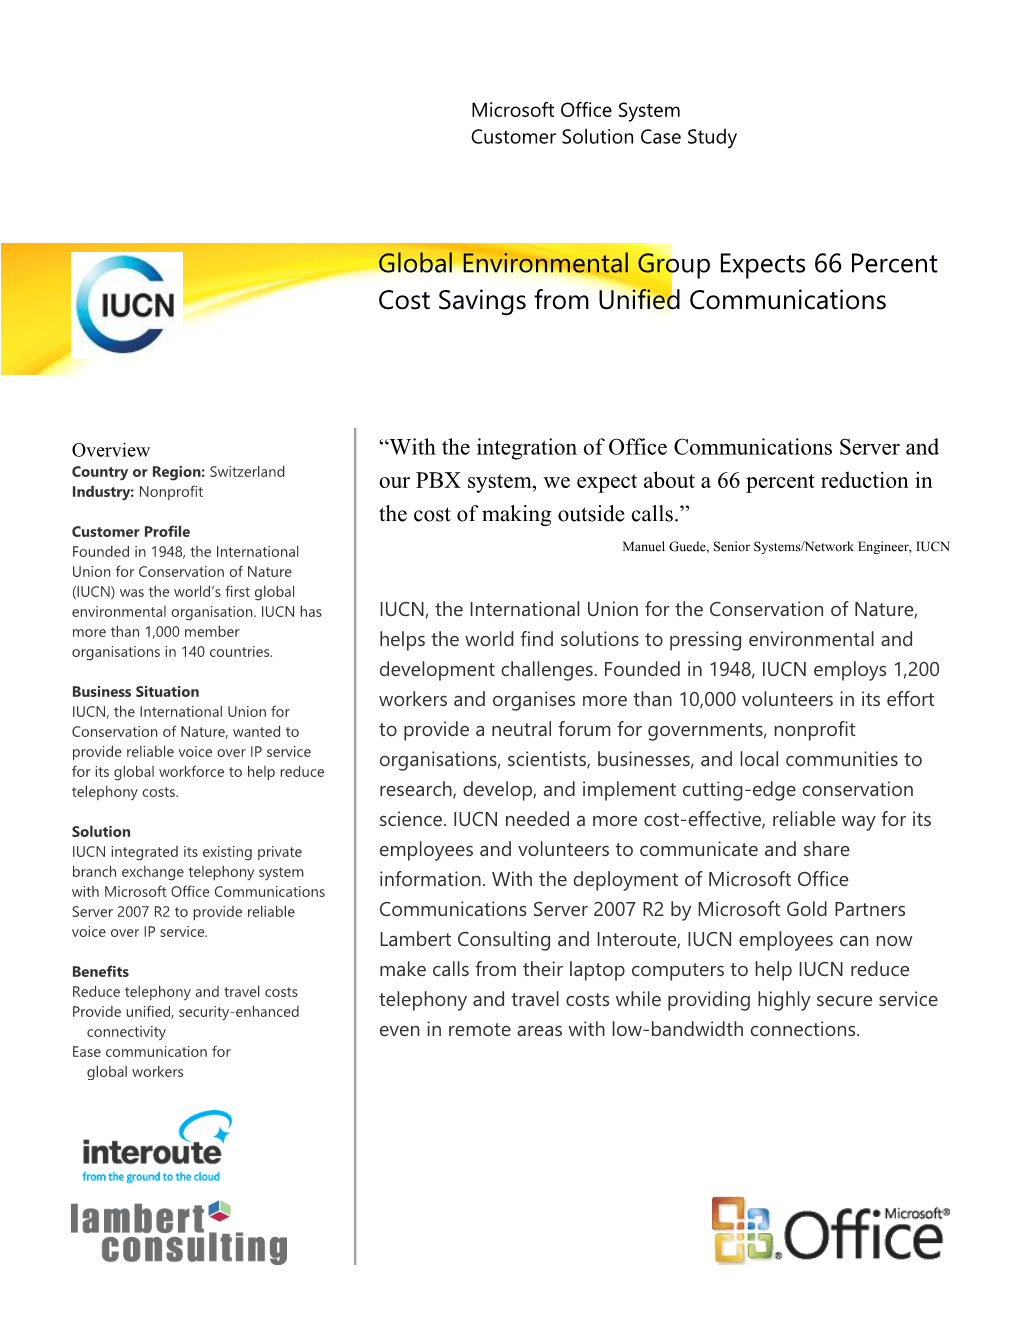 Reduce Telephony and Travel Costs